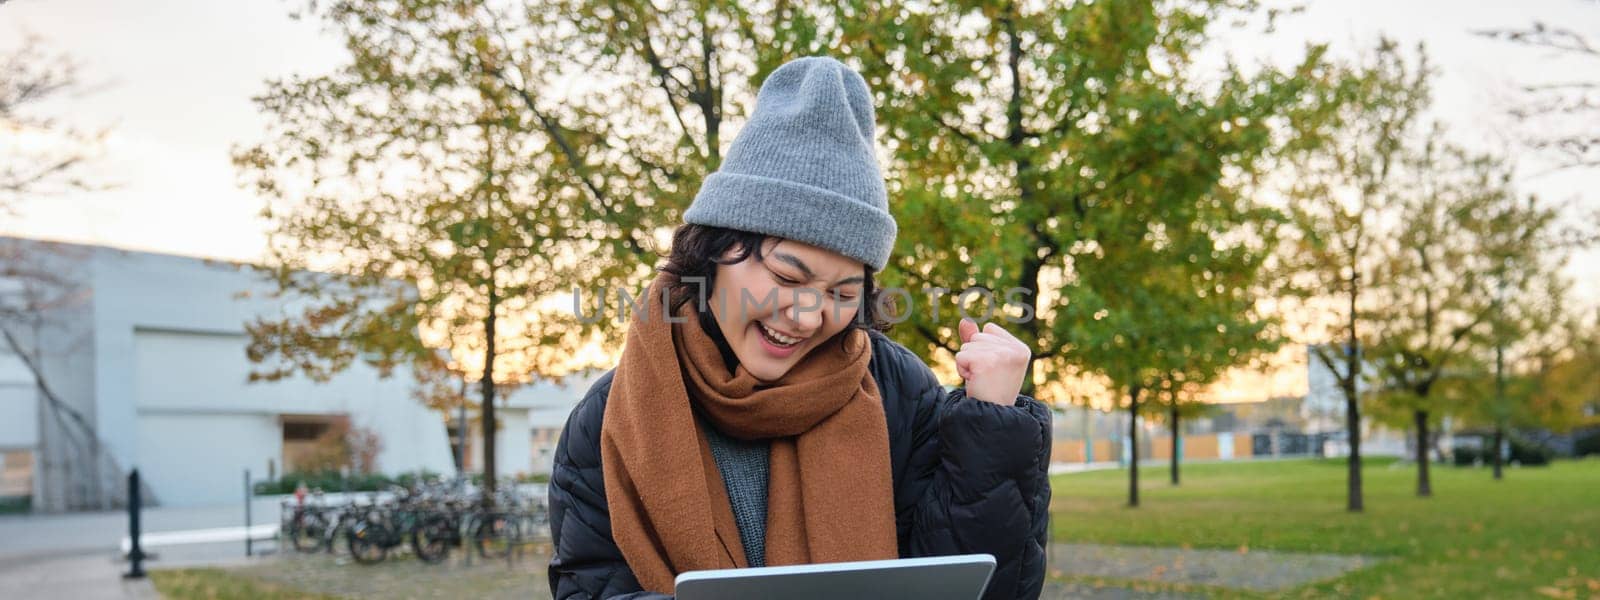 Portrait of happy asian girl sits on bench, looks at digital tablet screen and cheers, triumphs, wins something, celebrates good news, relaxes in park outdoors.